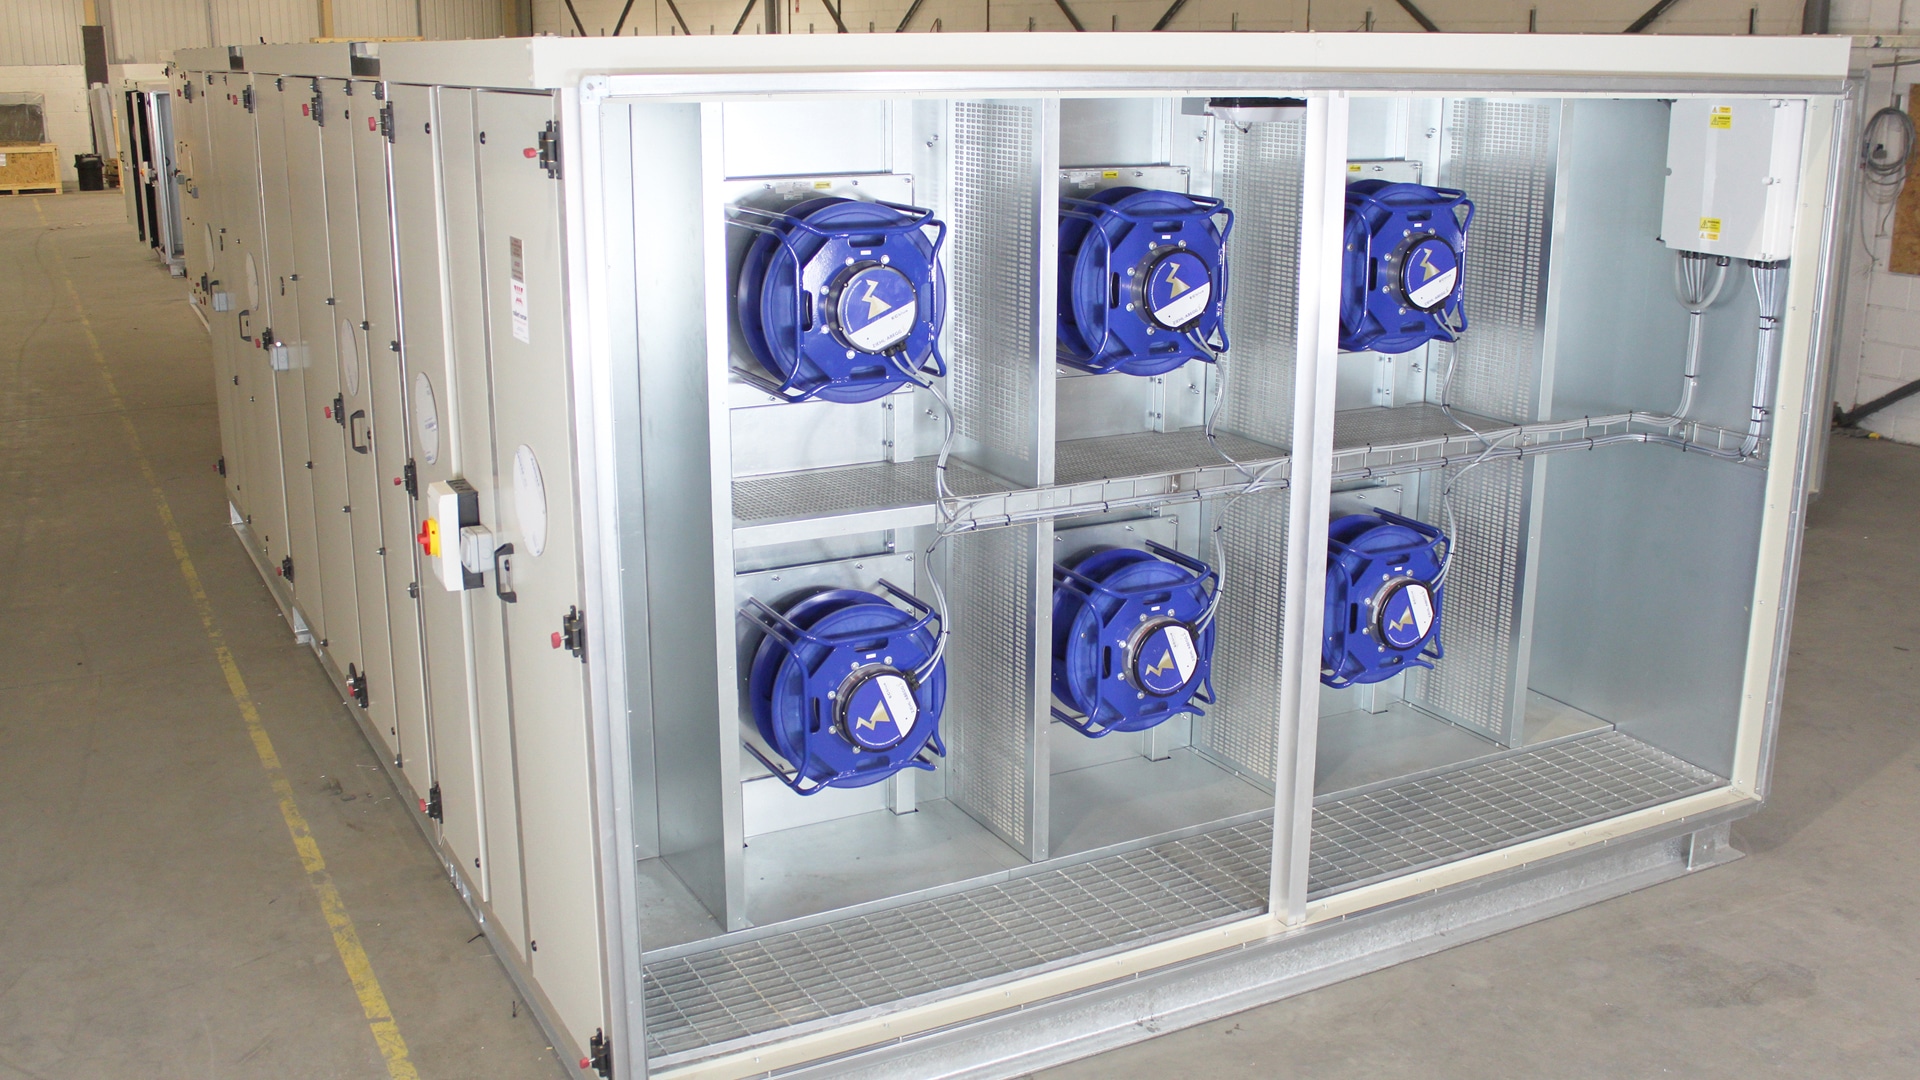 an Air Handling Unit showing a wall of fans. Six blue fans within an AHU